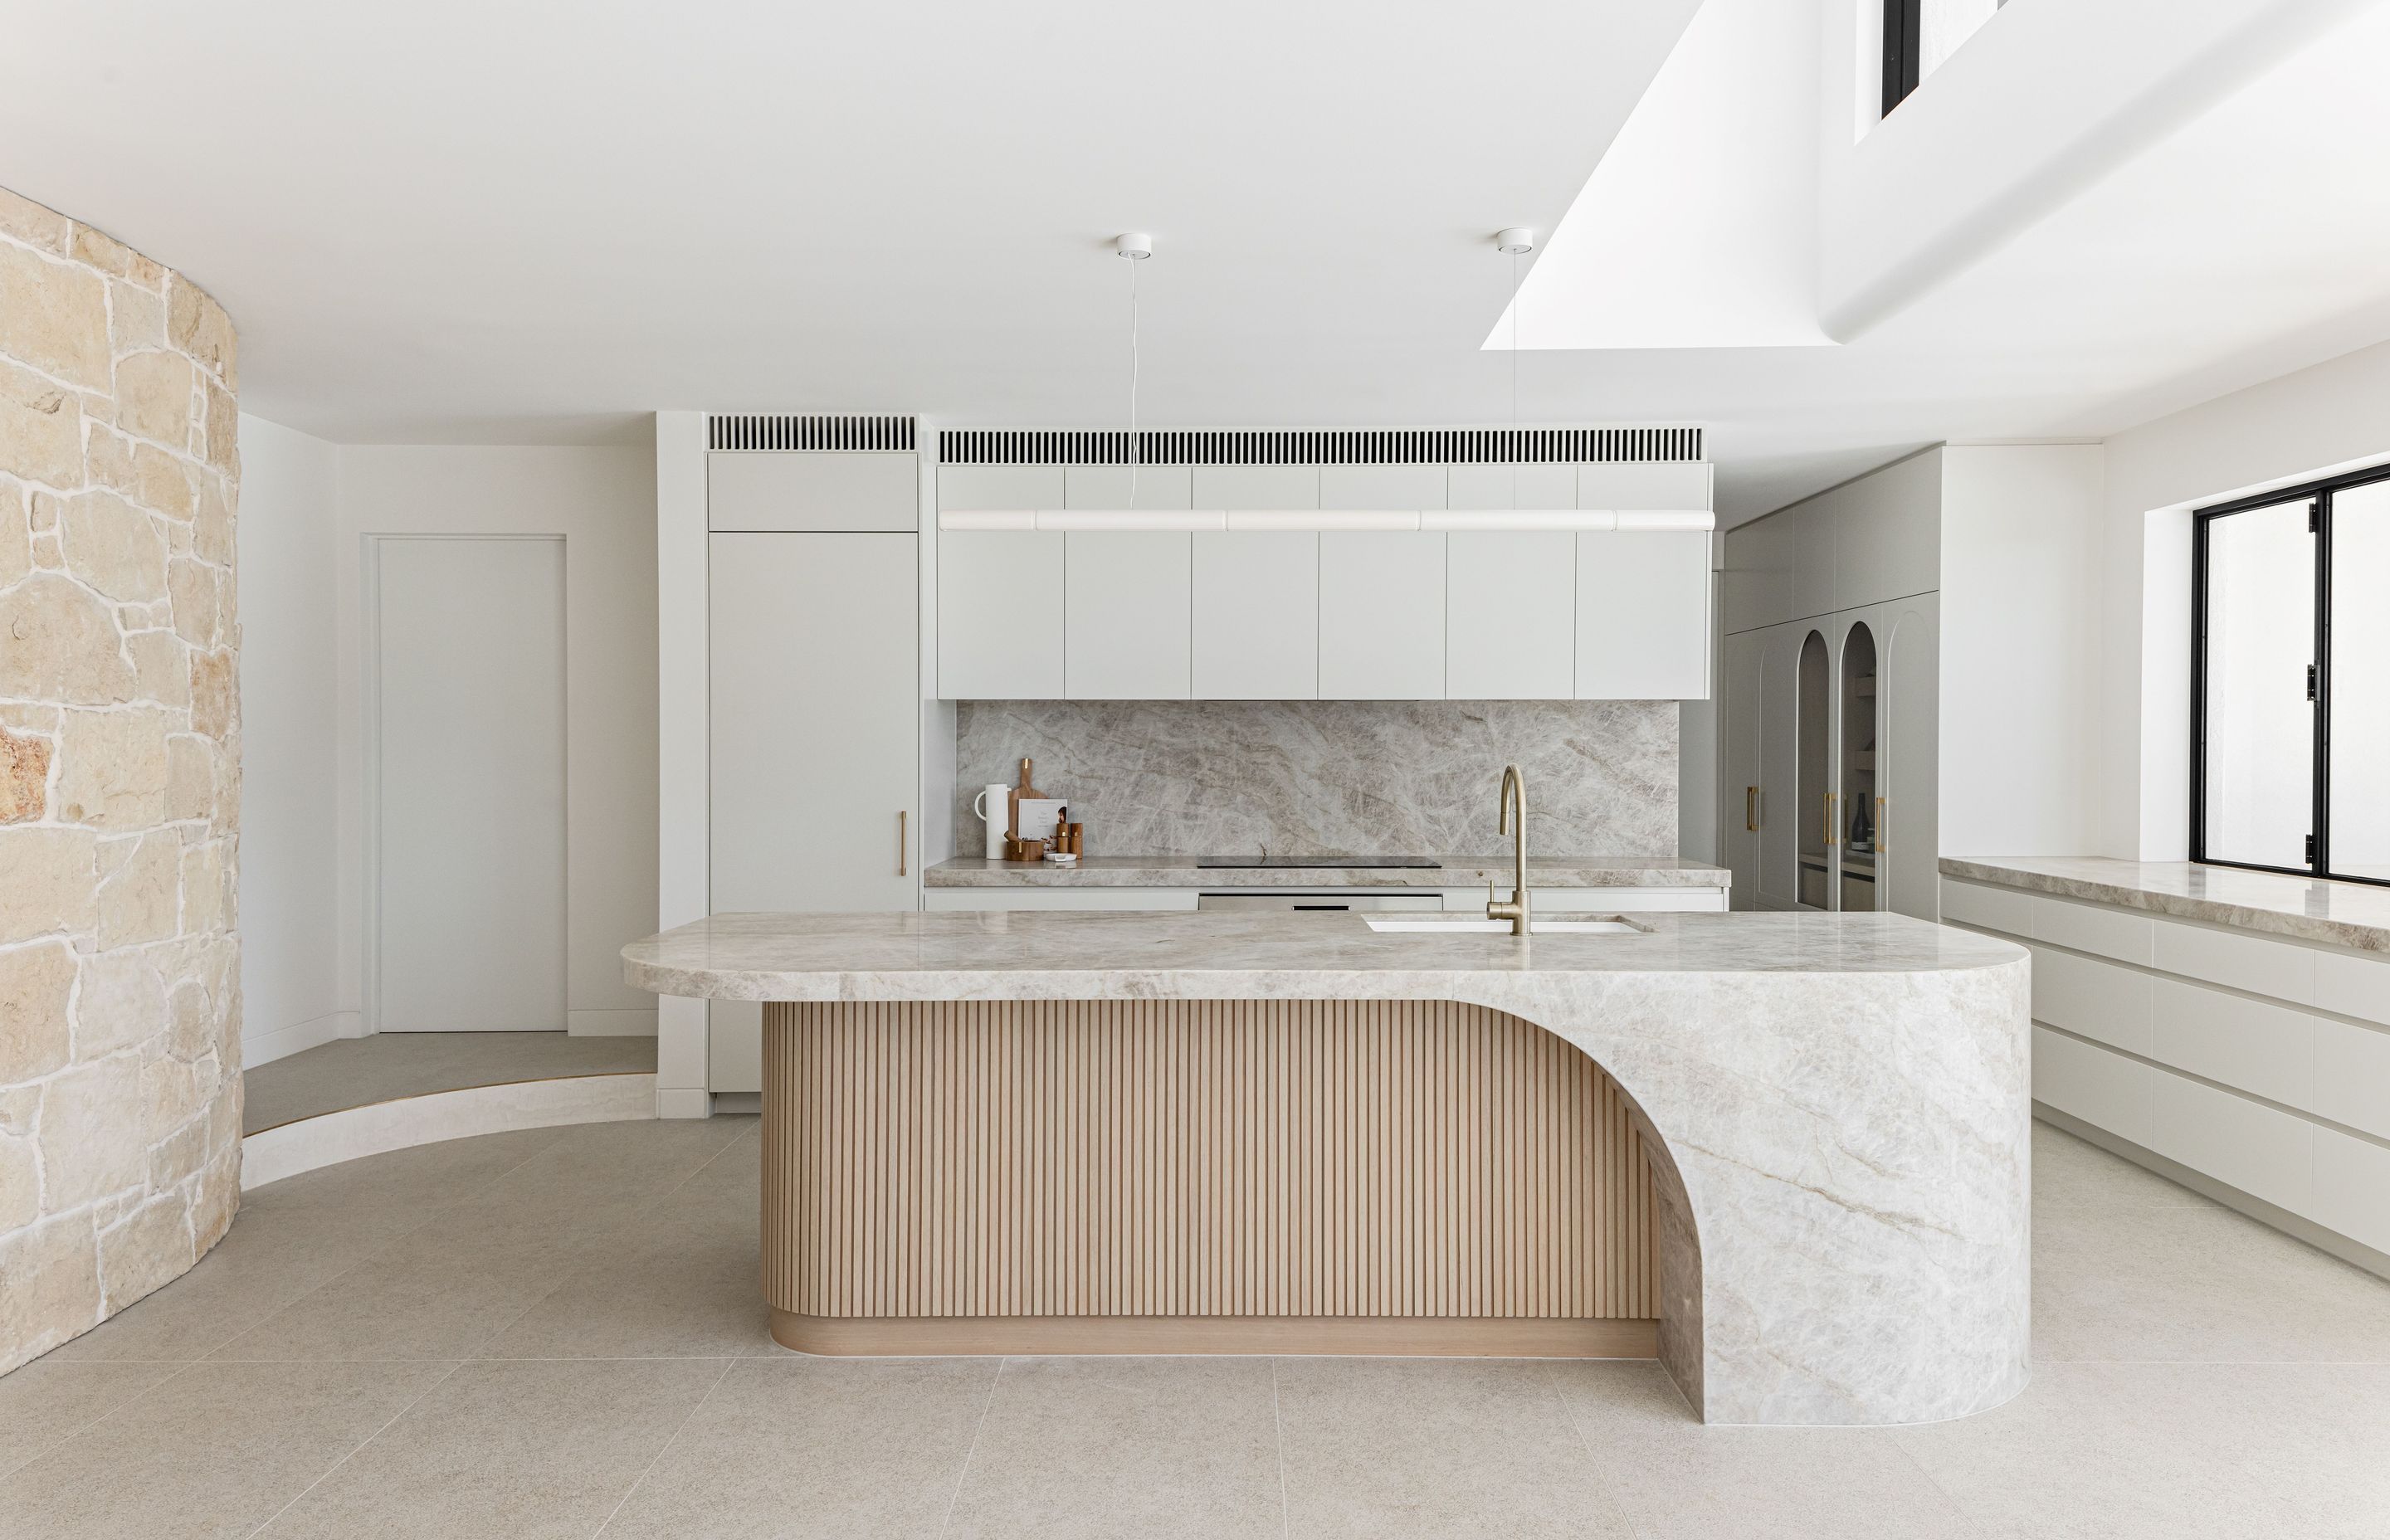 This kitchen by MattBuild Group celebrates multiple materials and attention to detail to create a cohesive, serene space.